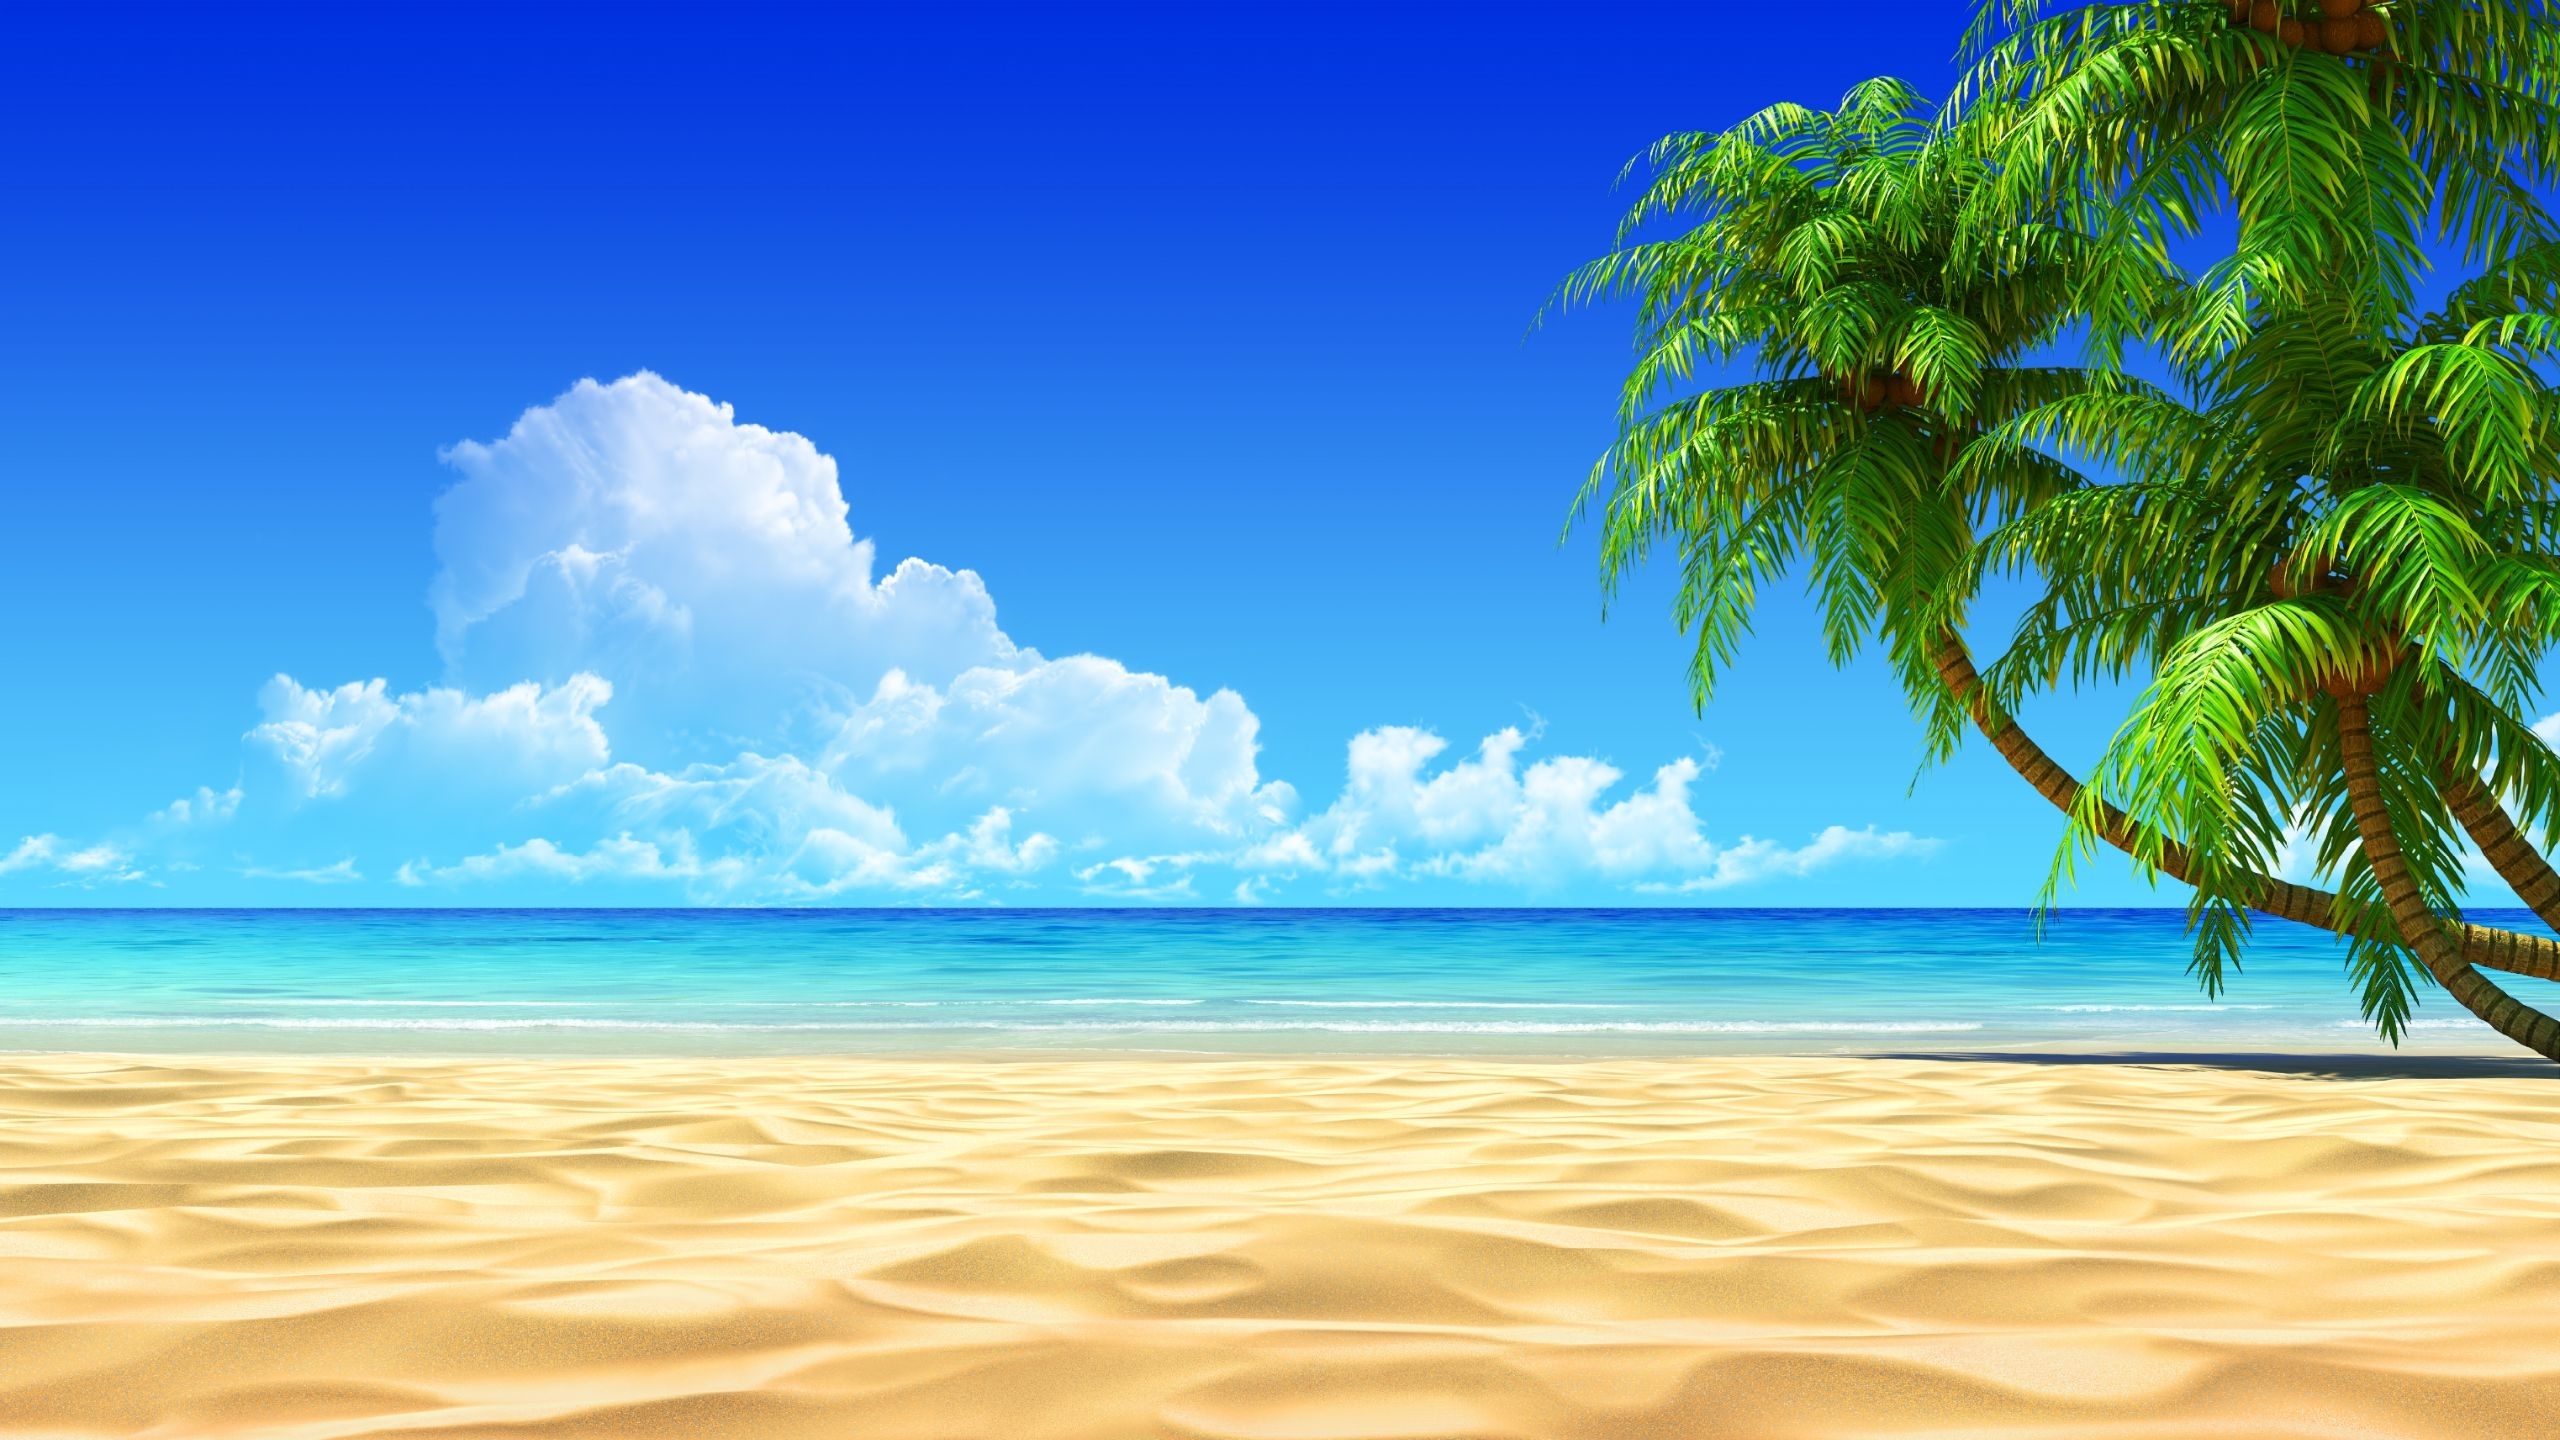 10 New Beach Palm Tree Background FULL HD 1080p For PC Background